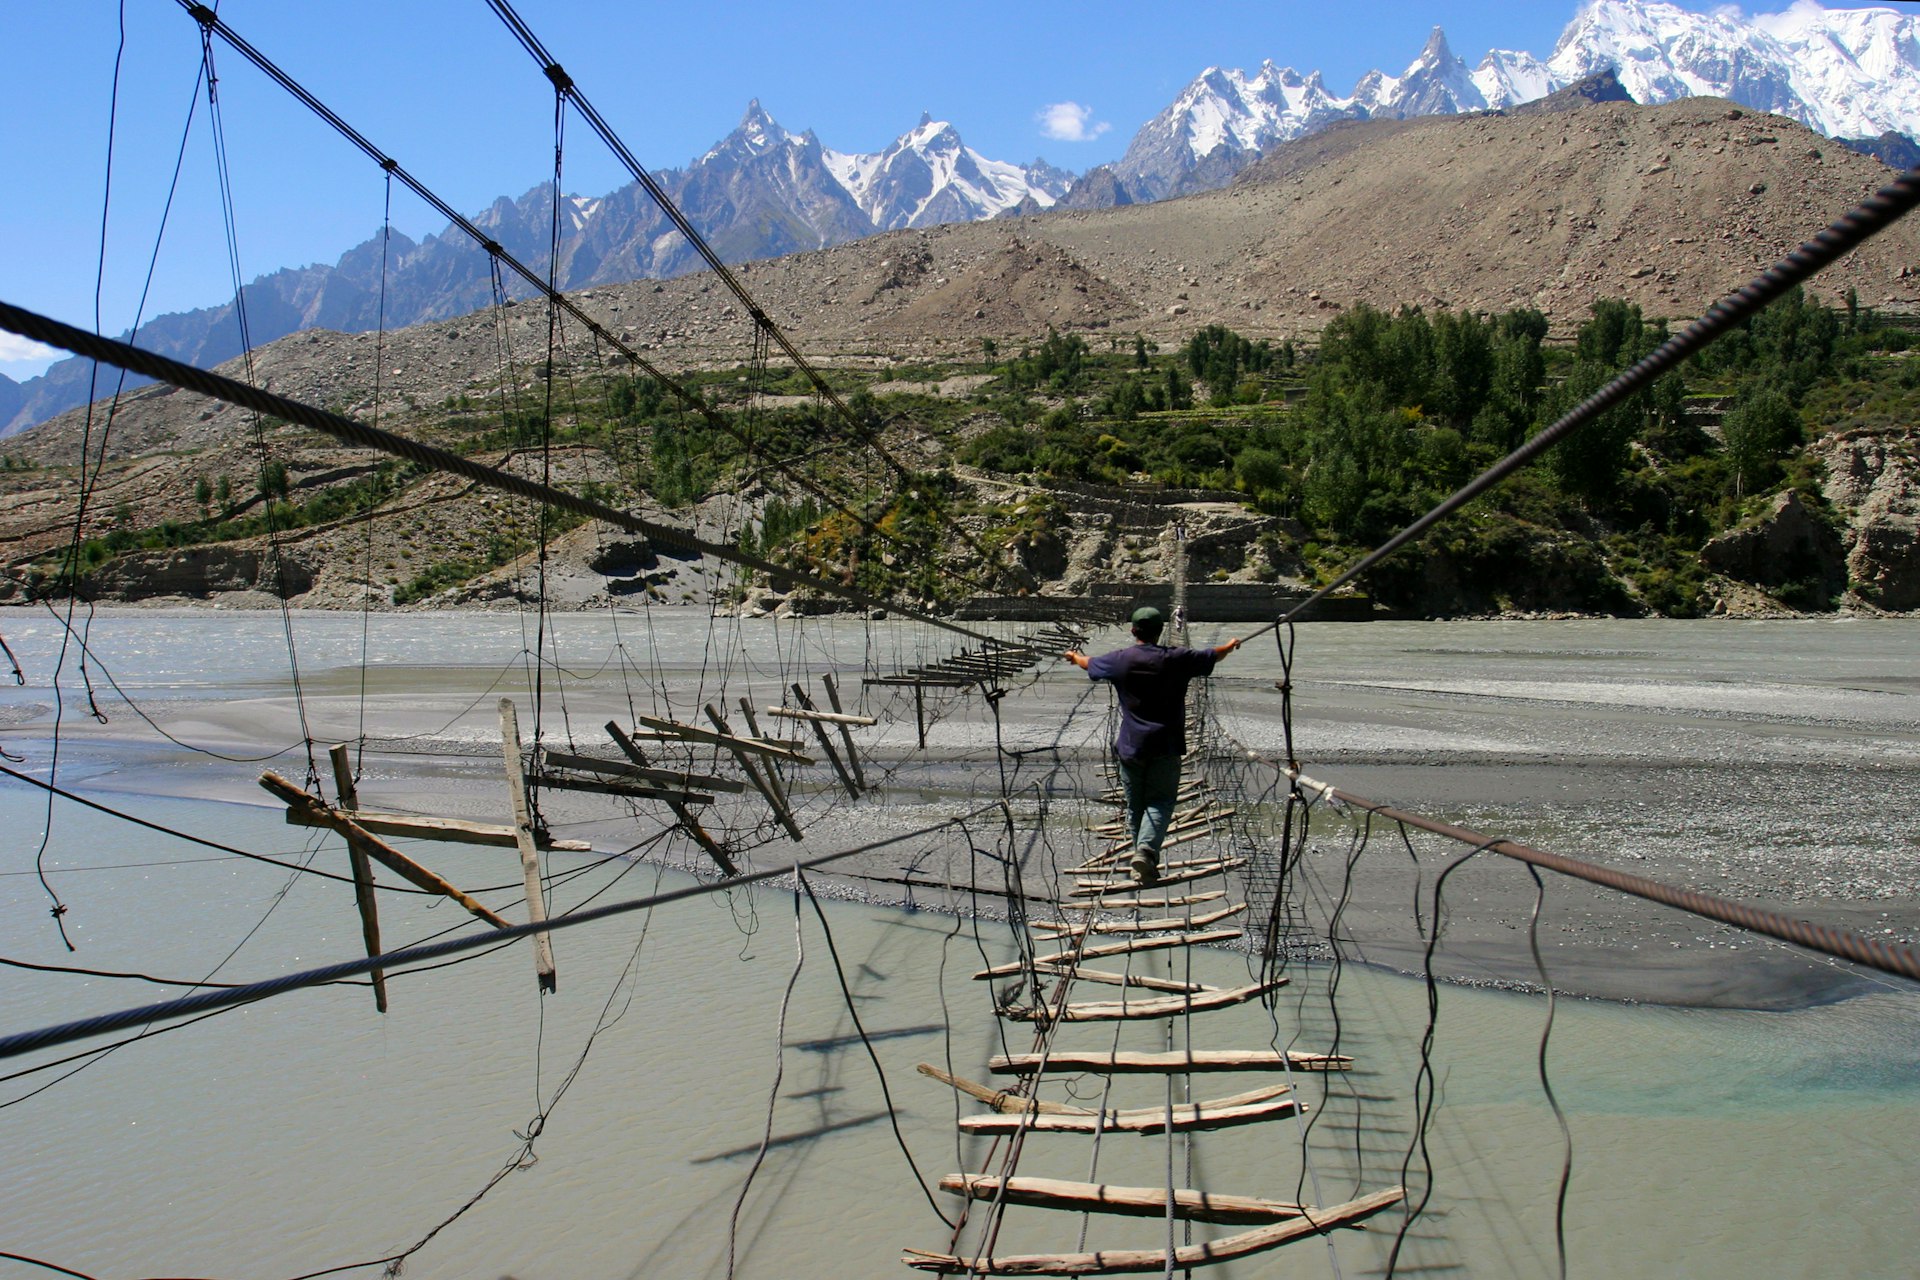 A man walks across a crude bridge strung together with ropes and wooden slats over a river 